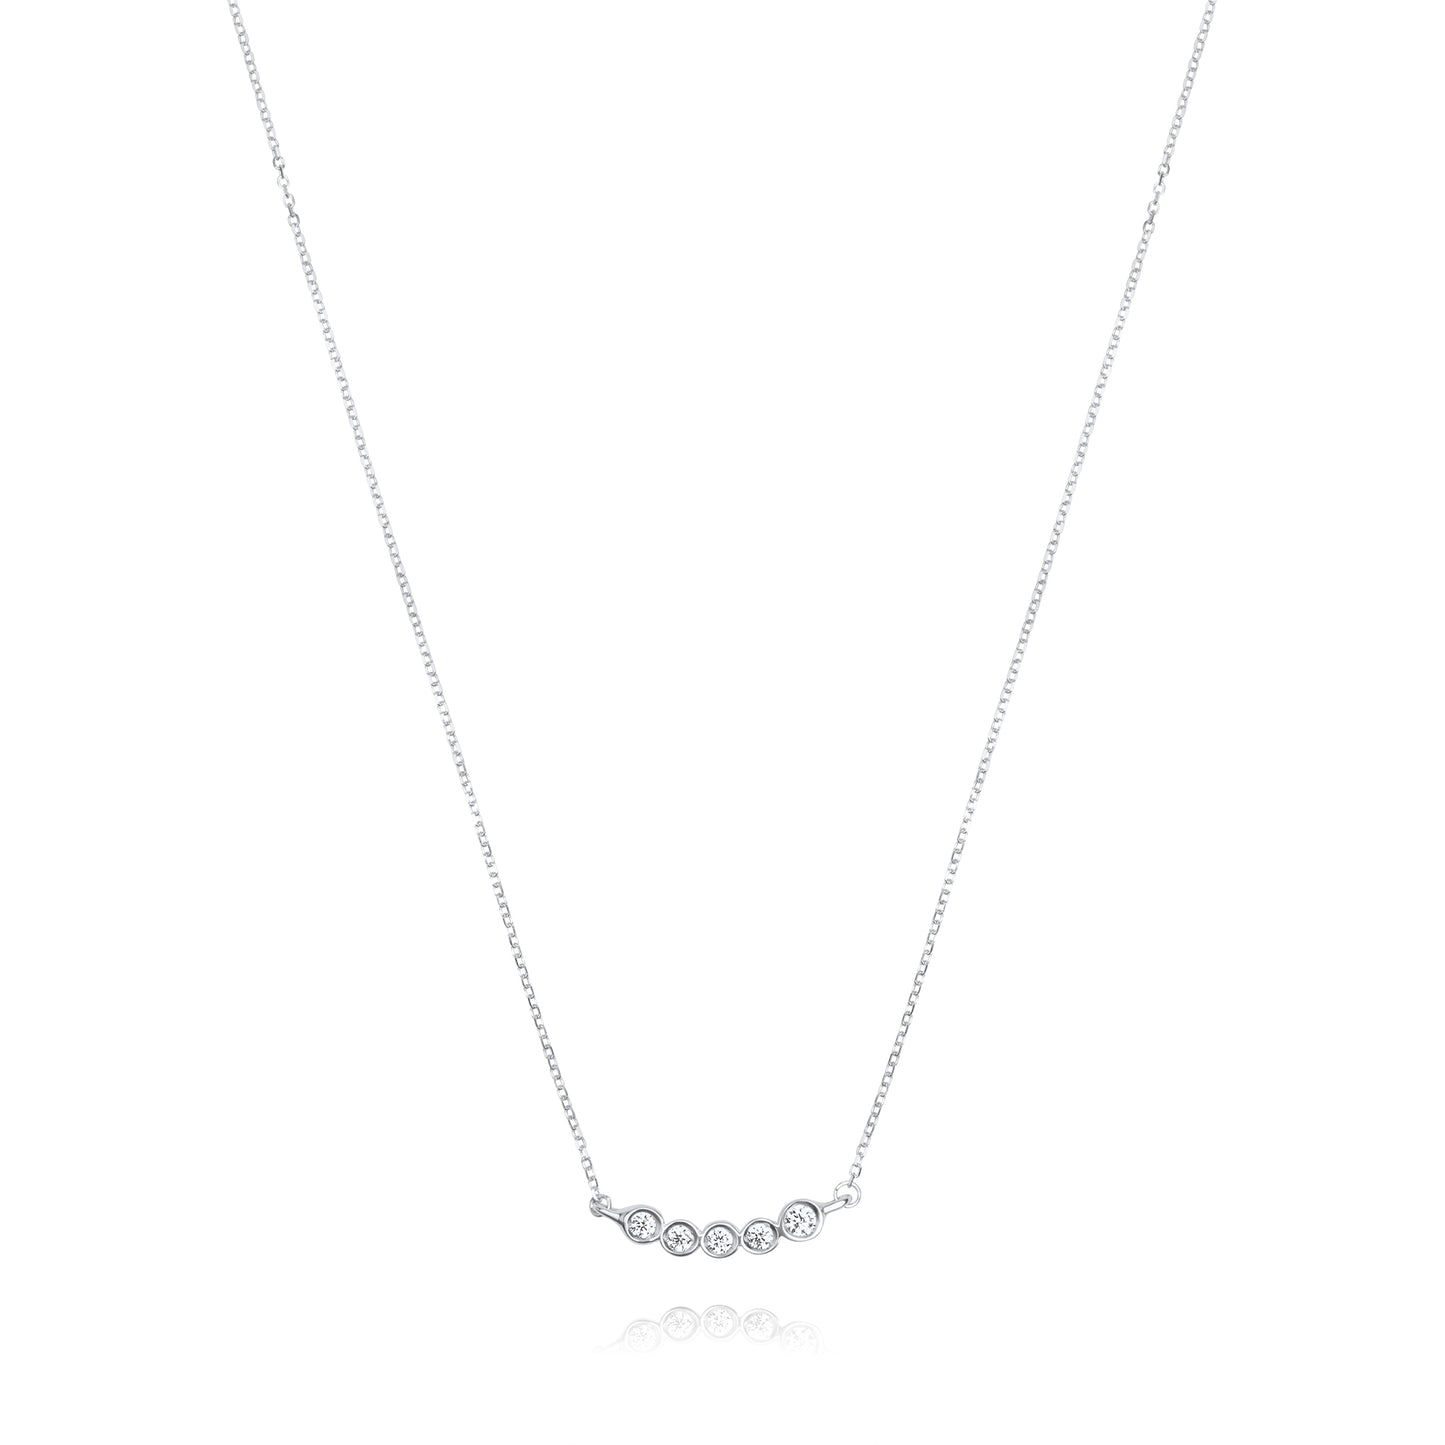 Smiley 9k White Gold Necklace